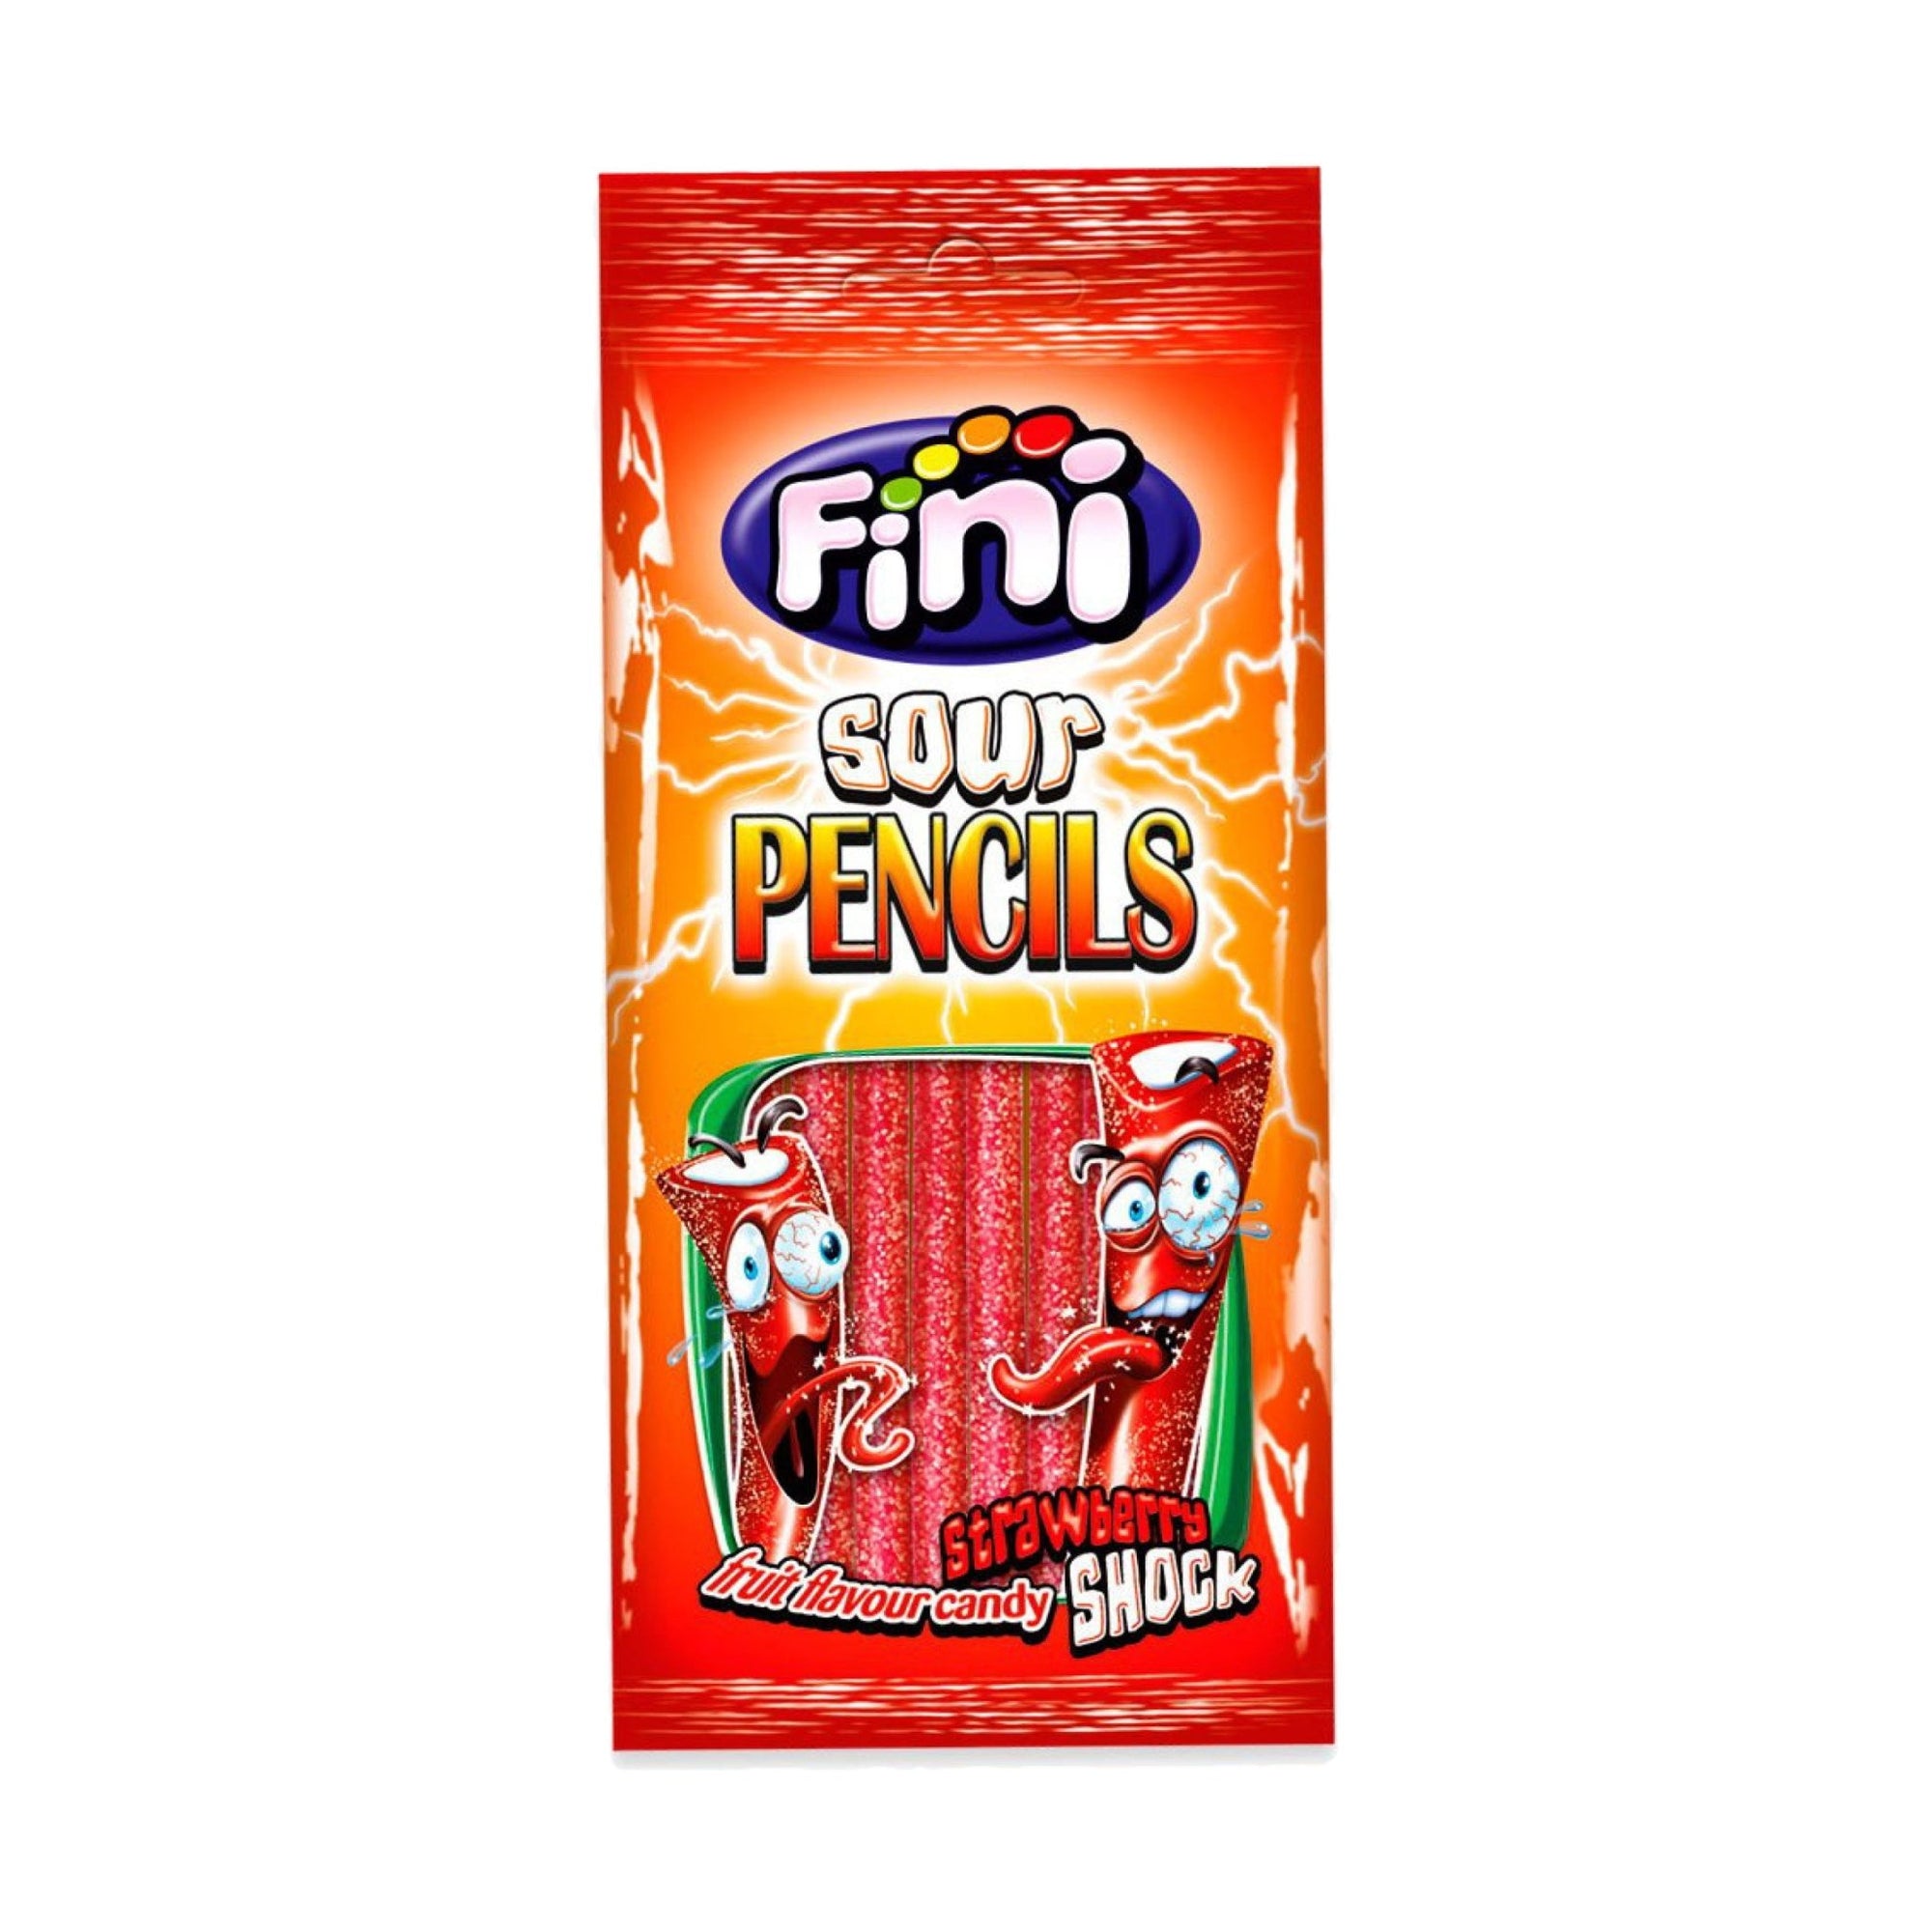 Fini Sour Strawberry Pencils 75 g - Fast Candy